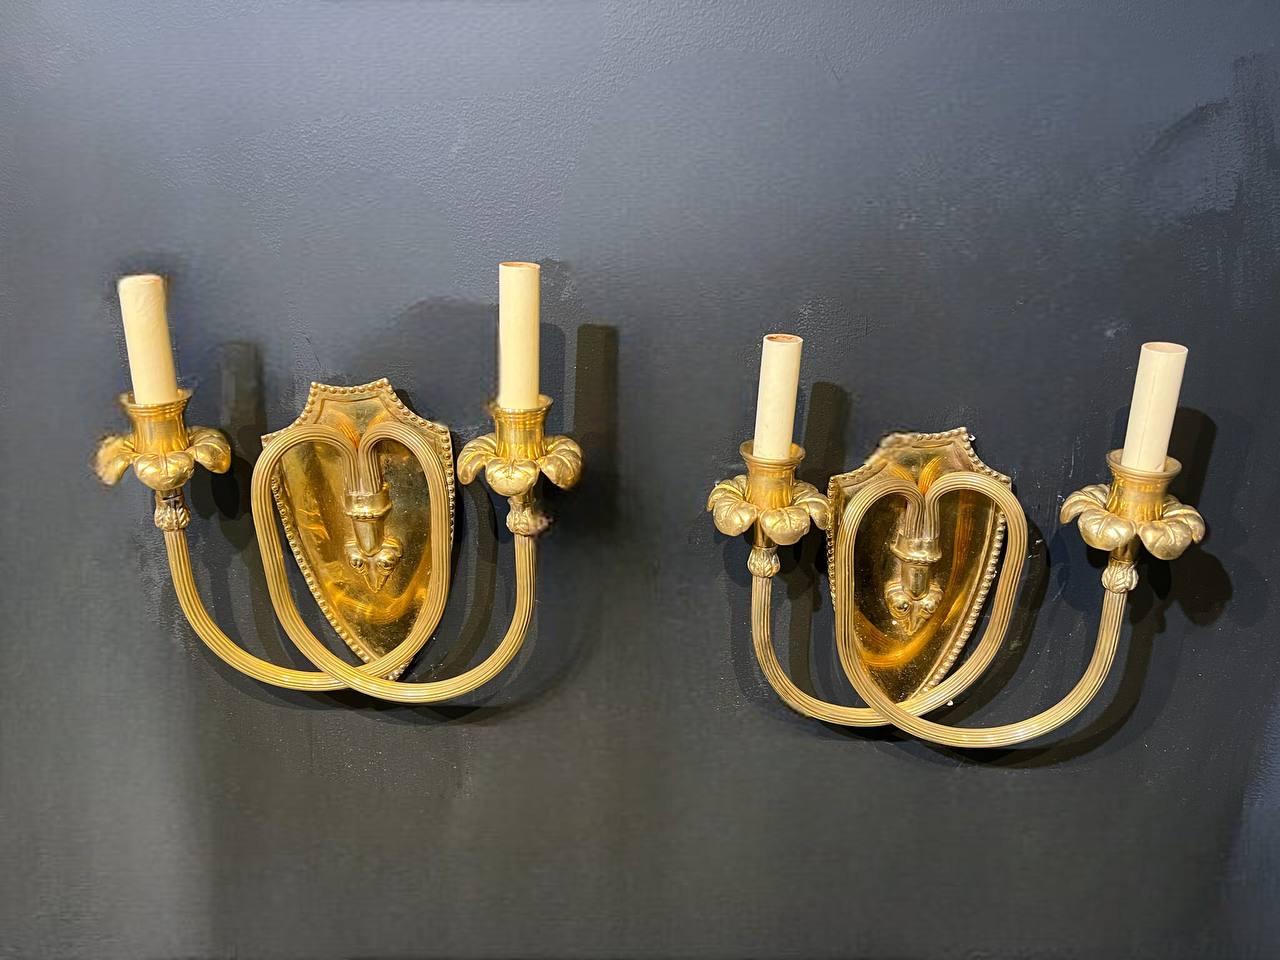 A pair of circa 1920’s Caldwell double light sconces with scrolled arms